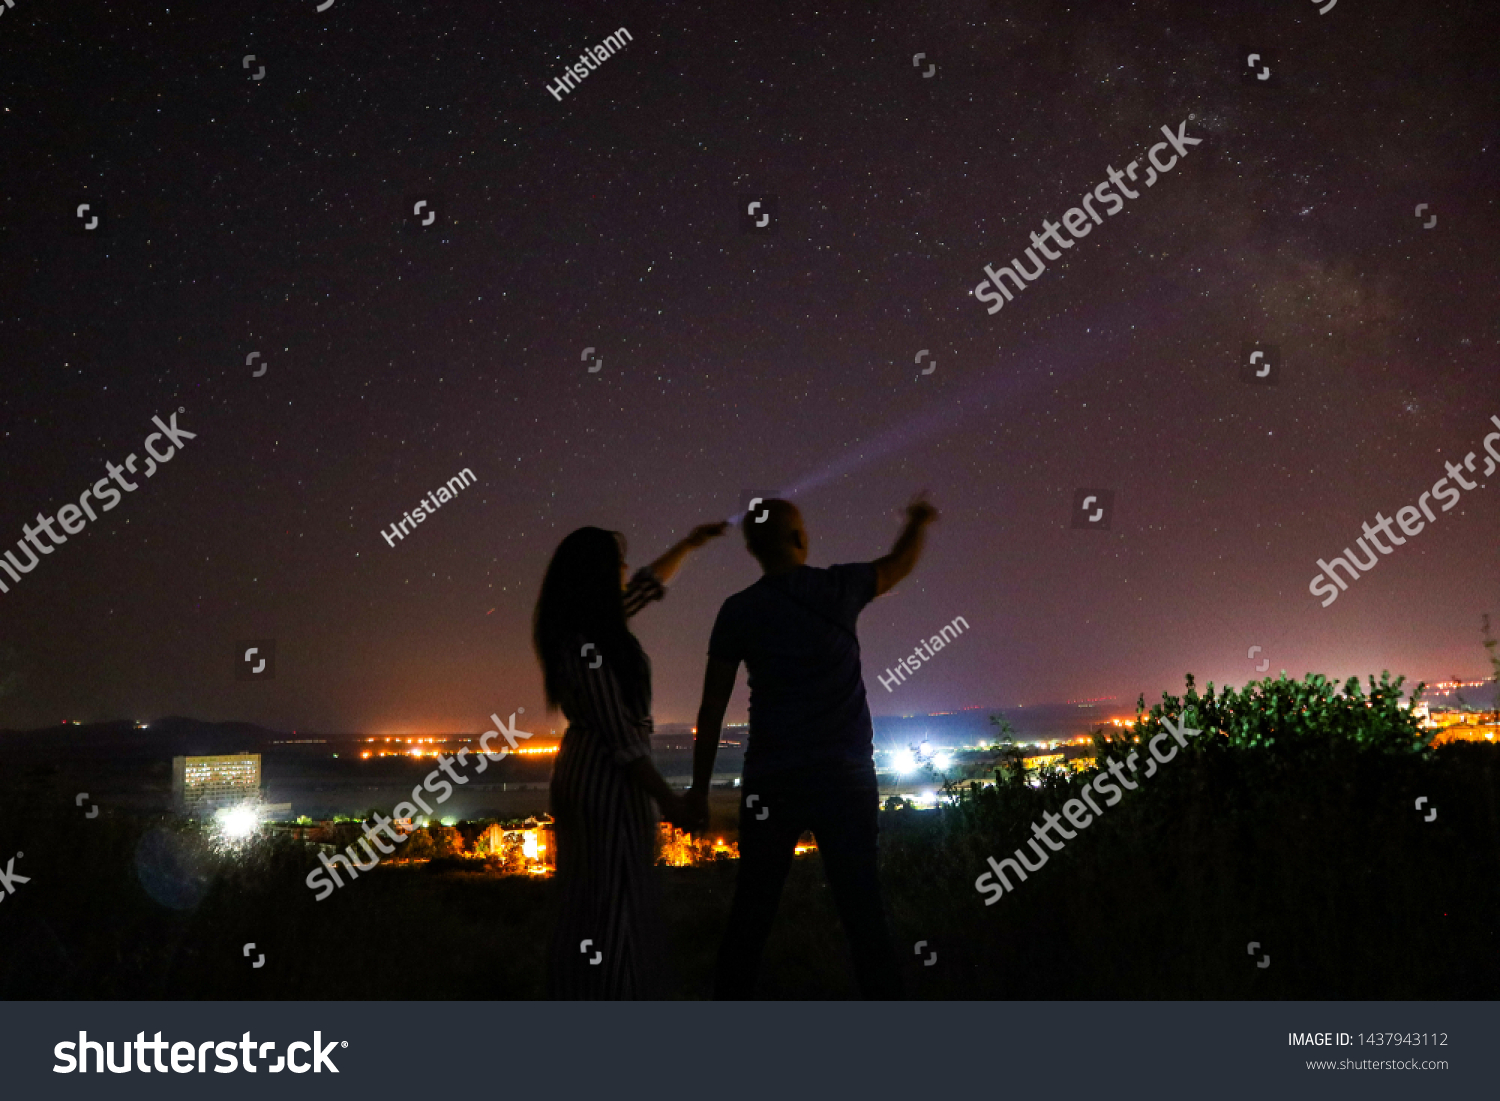 Watching the city lights and pointing at the biggest star in the sky. #1437943112